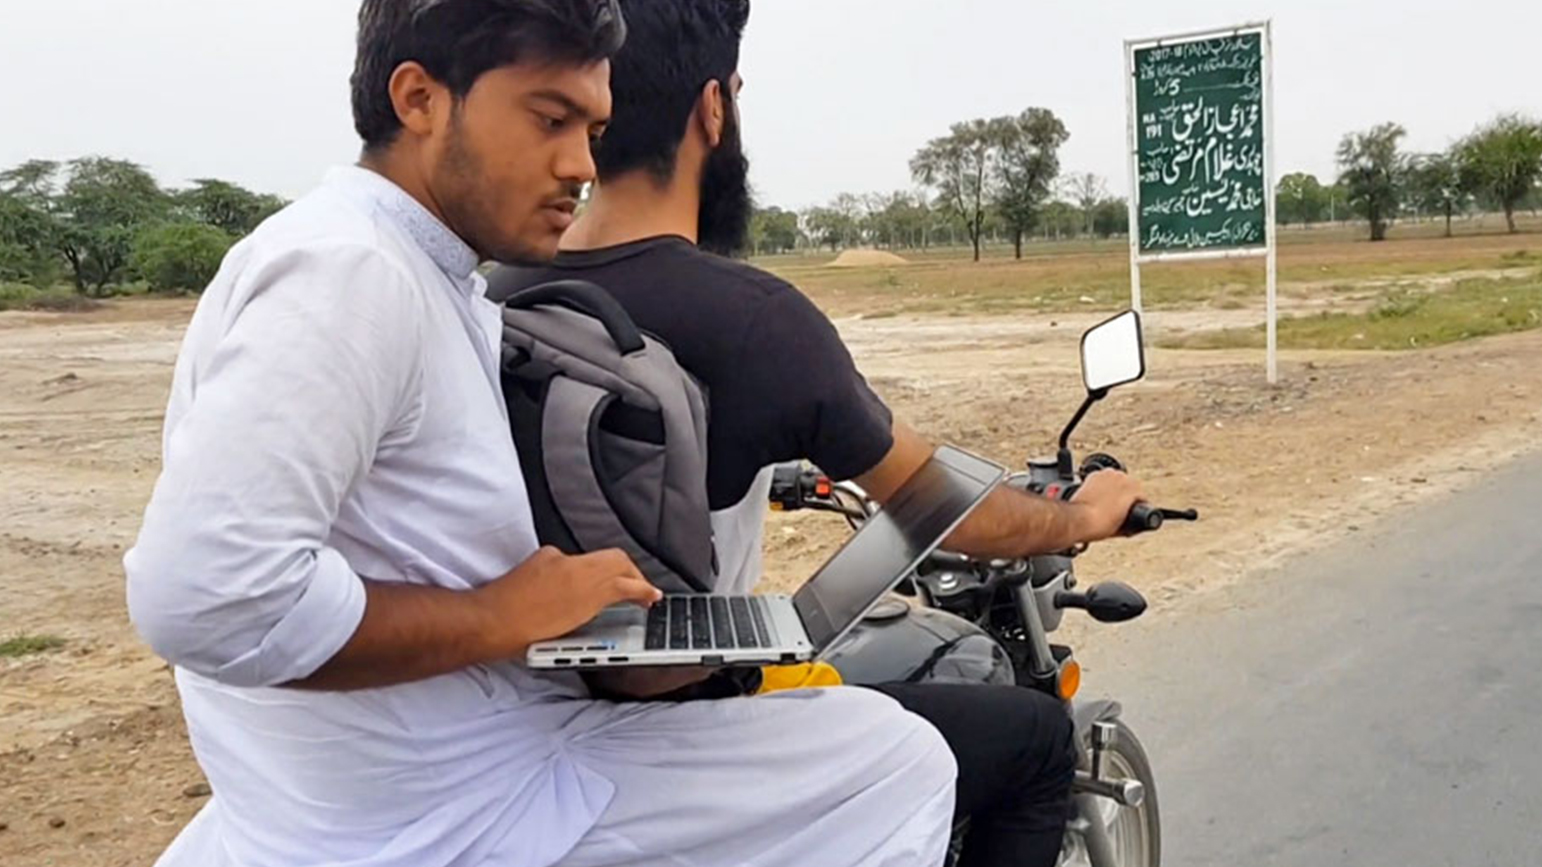 Photograph of two men on a motorcycle, one holding a laptop